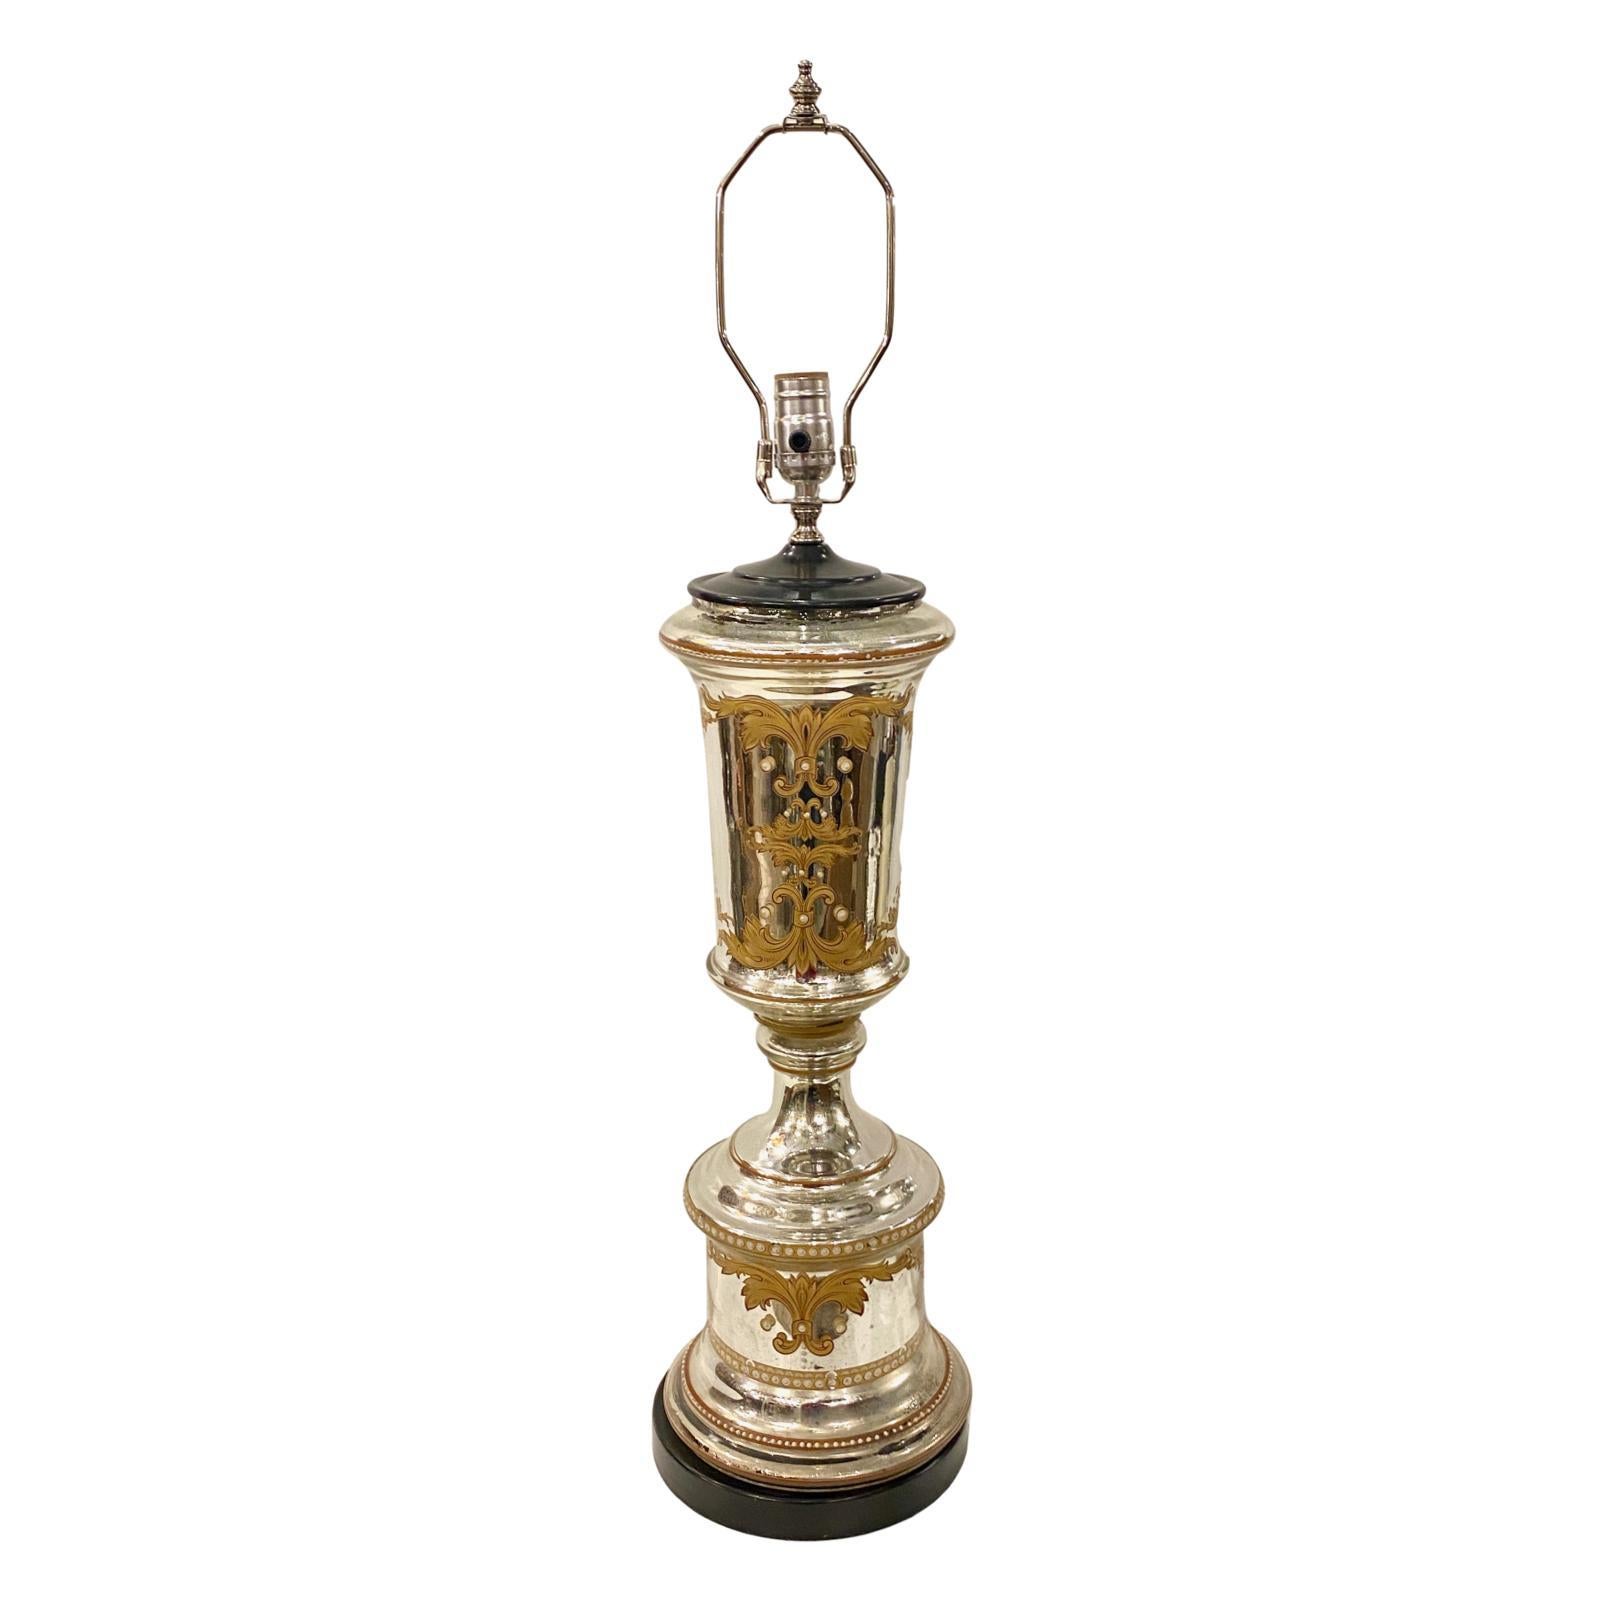 A single French circa 1940s mercury glass table lamp with gilt and painted details.

Measurements:
Height of body 24